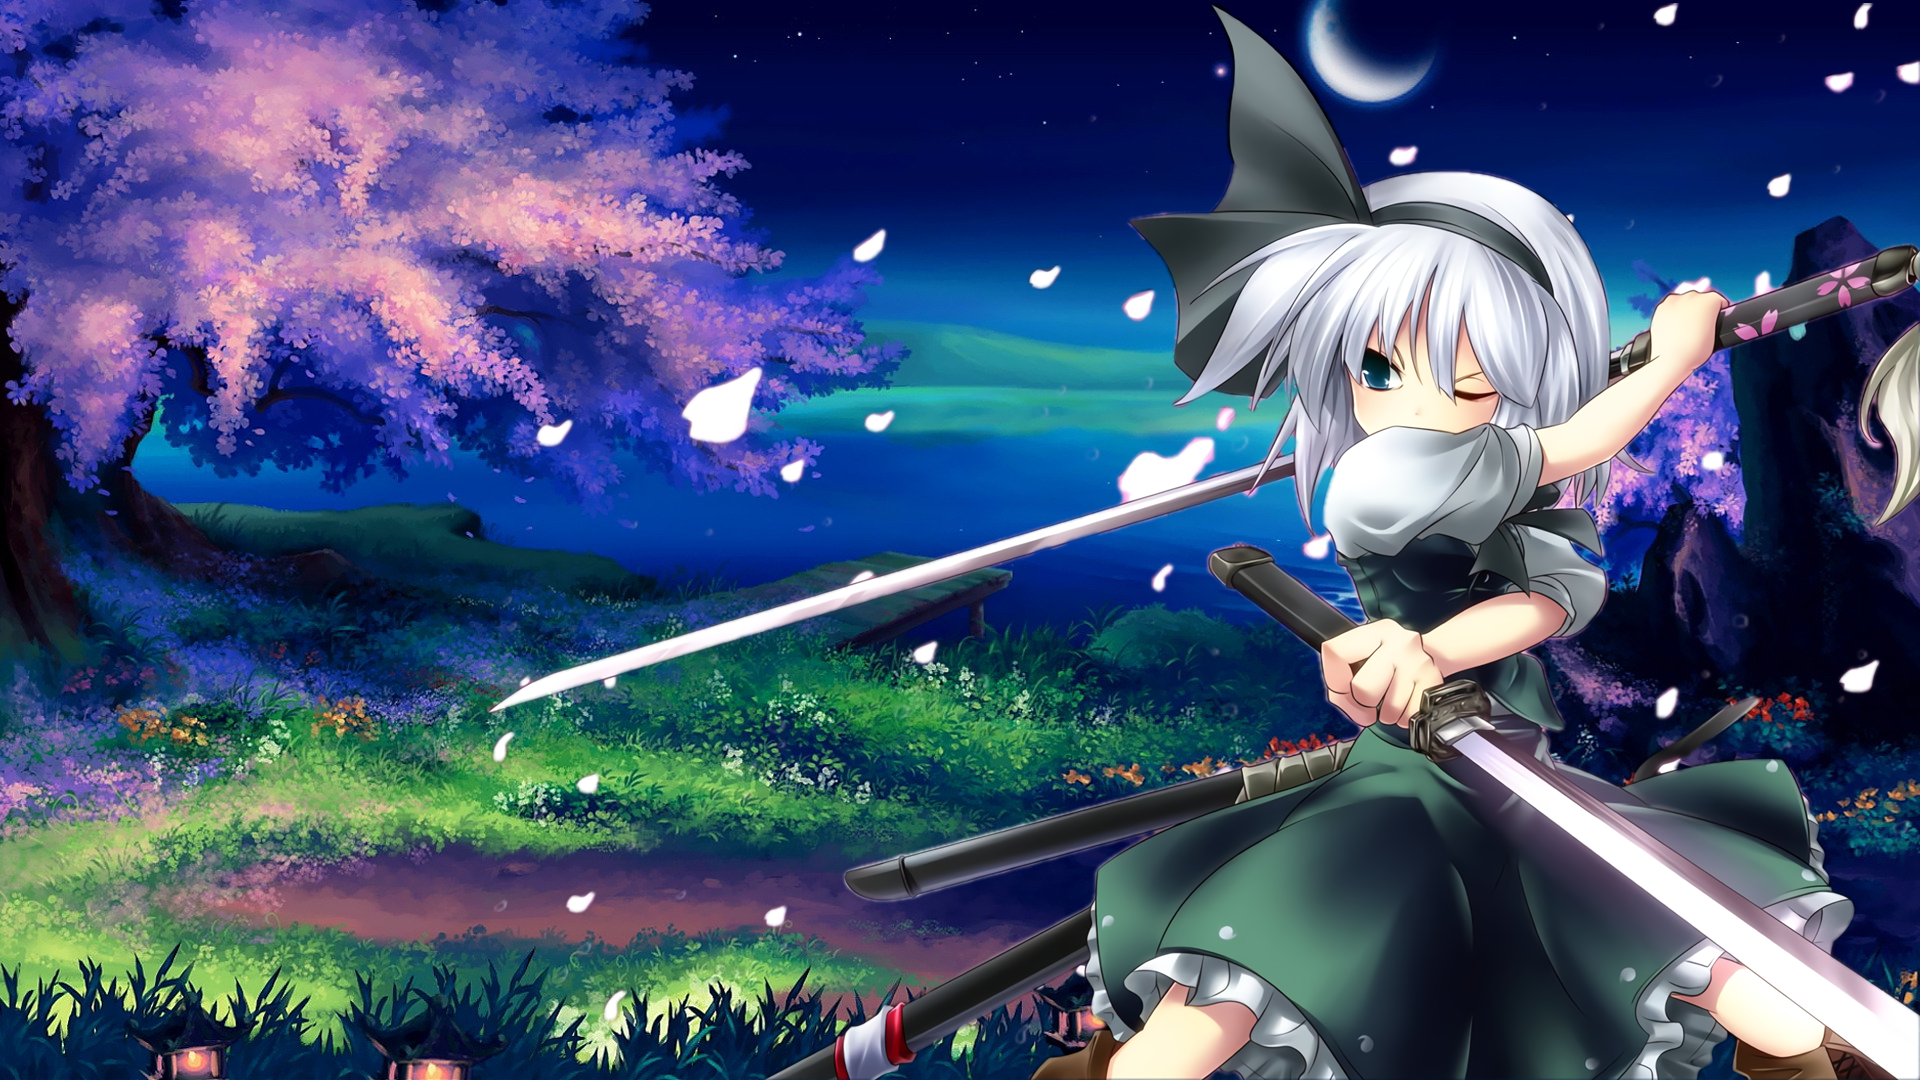 Wallpaper for best girl youmu touhou project ææproject know your meme